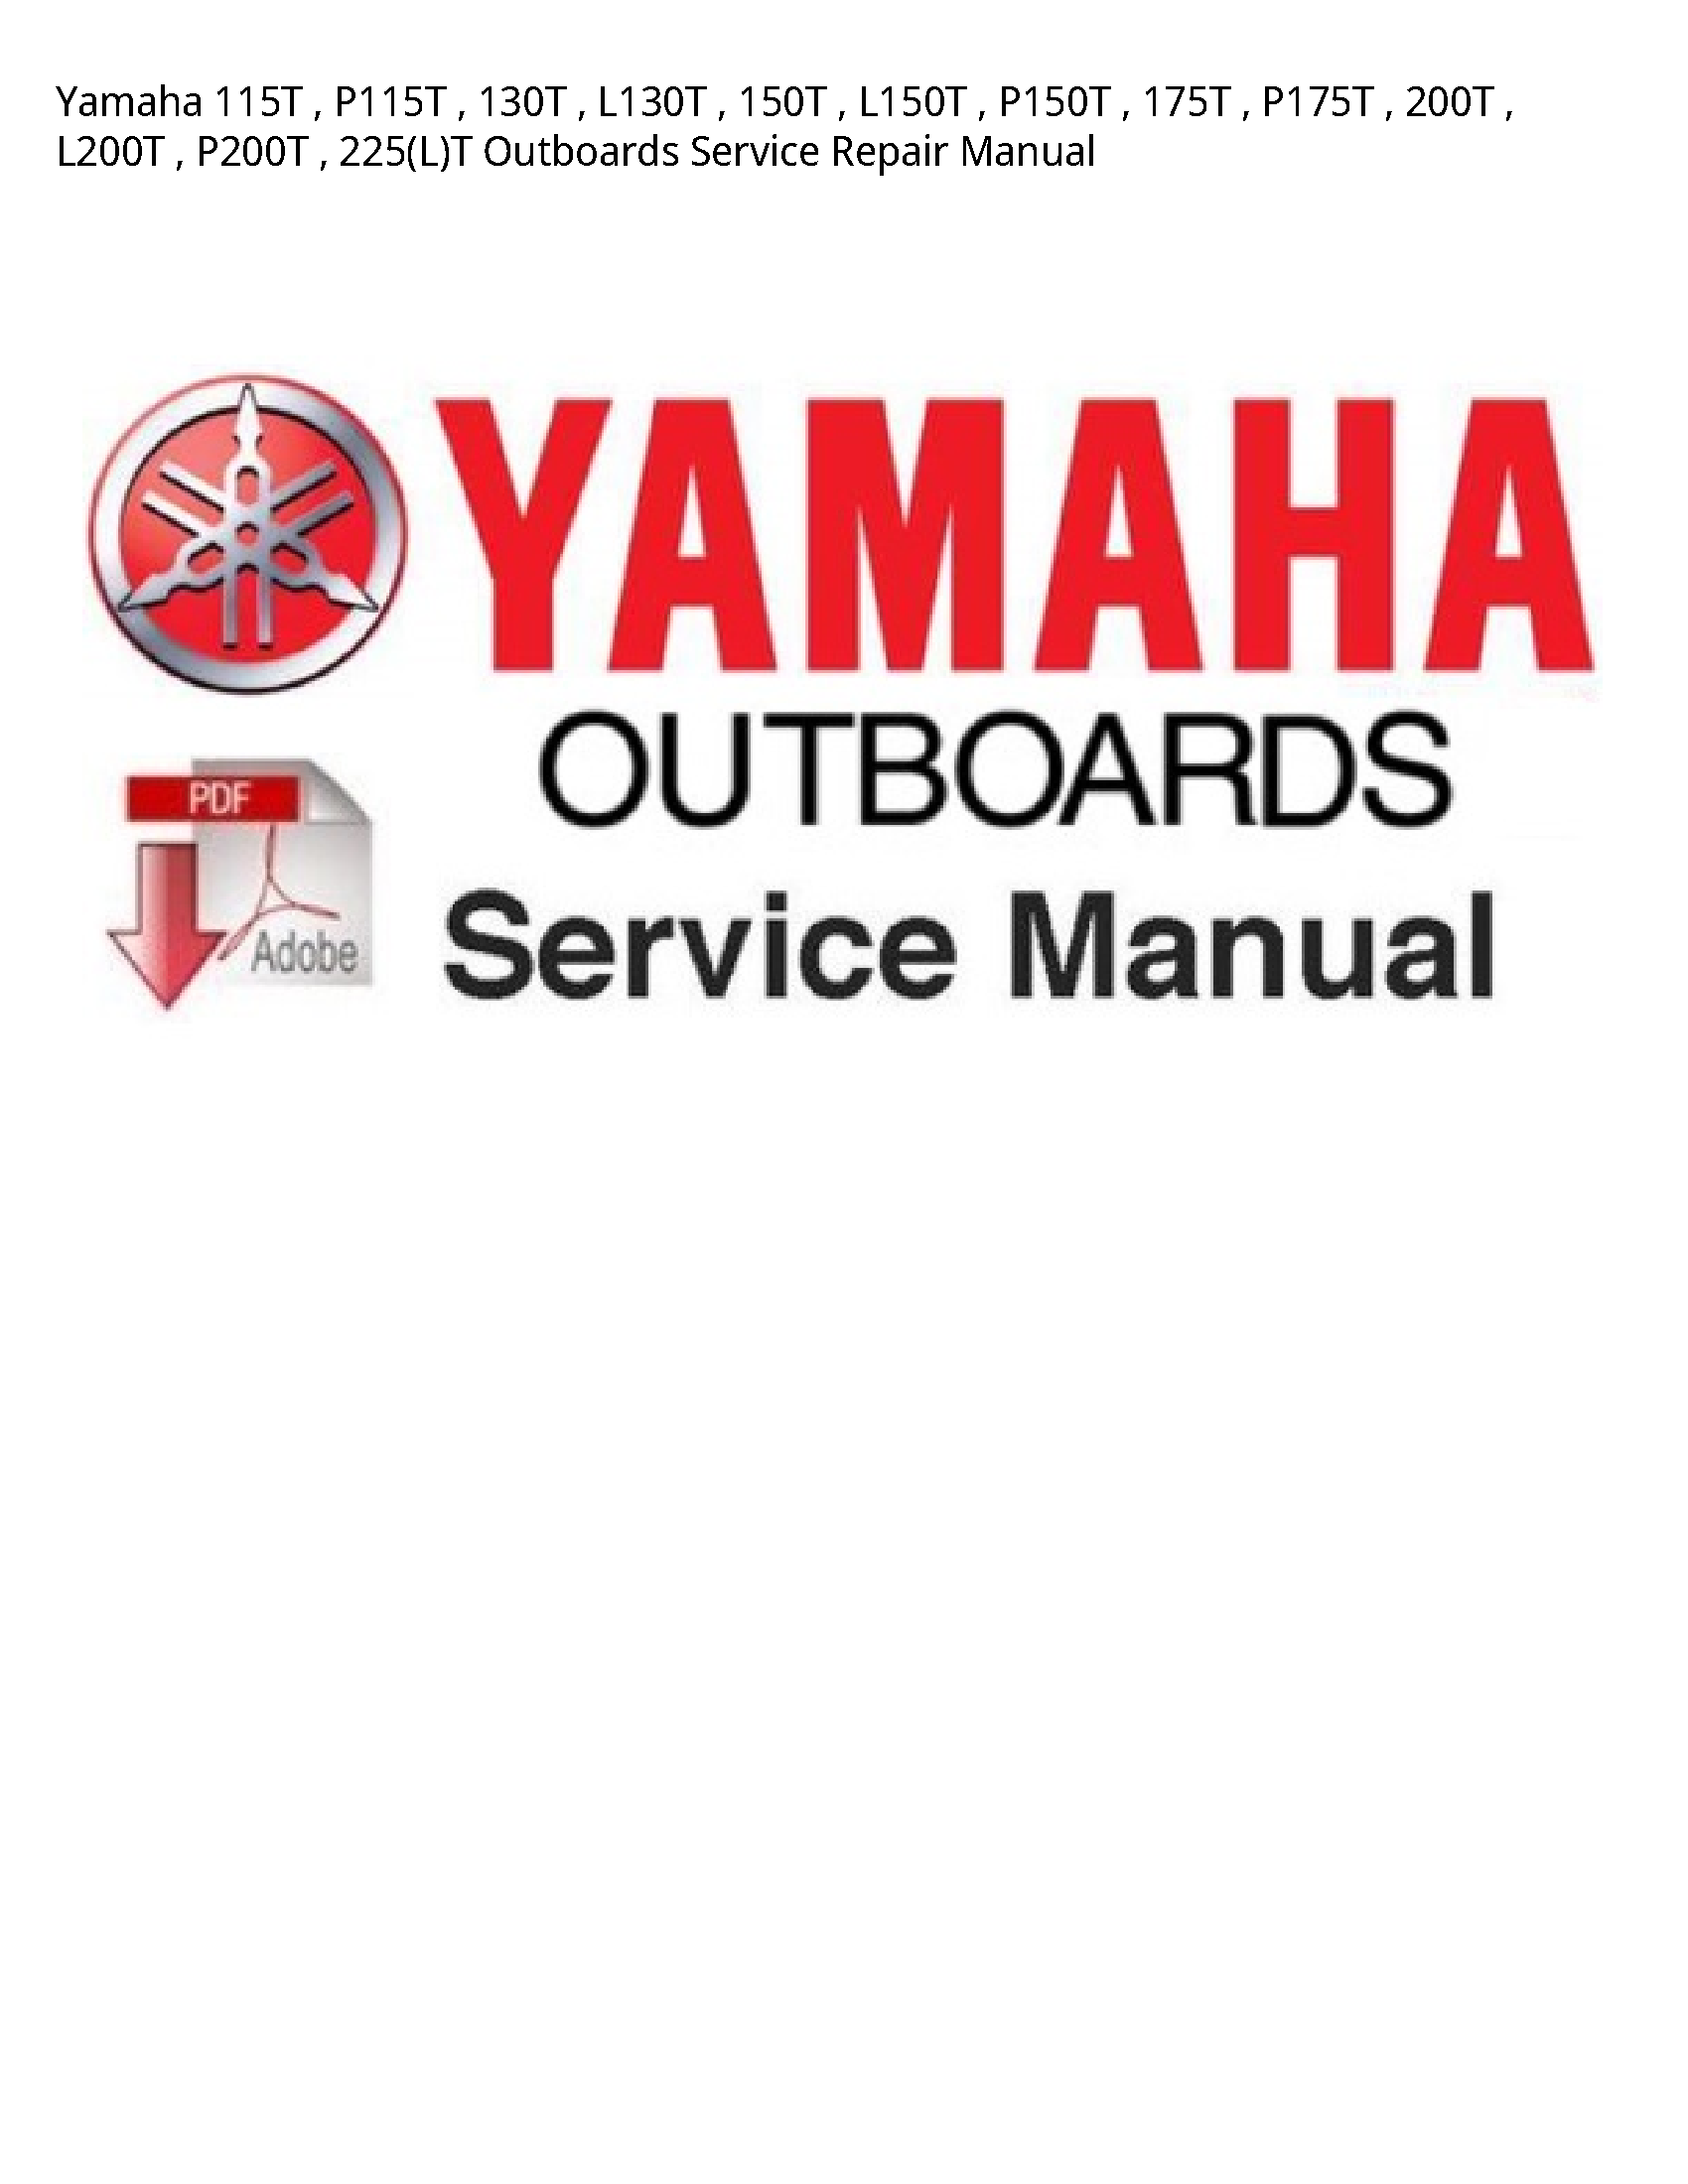 Yamaha 115T Outboards manual